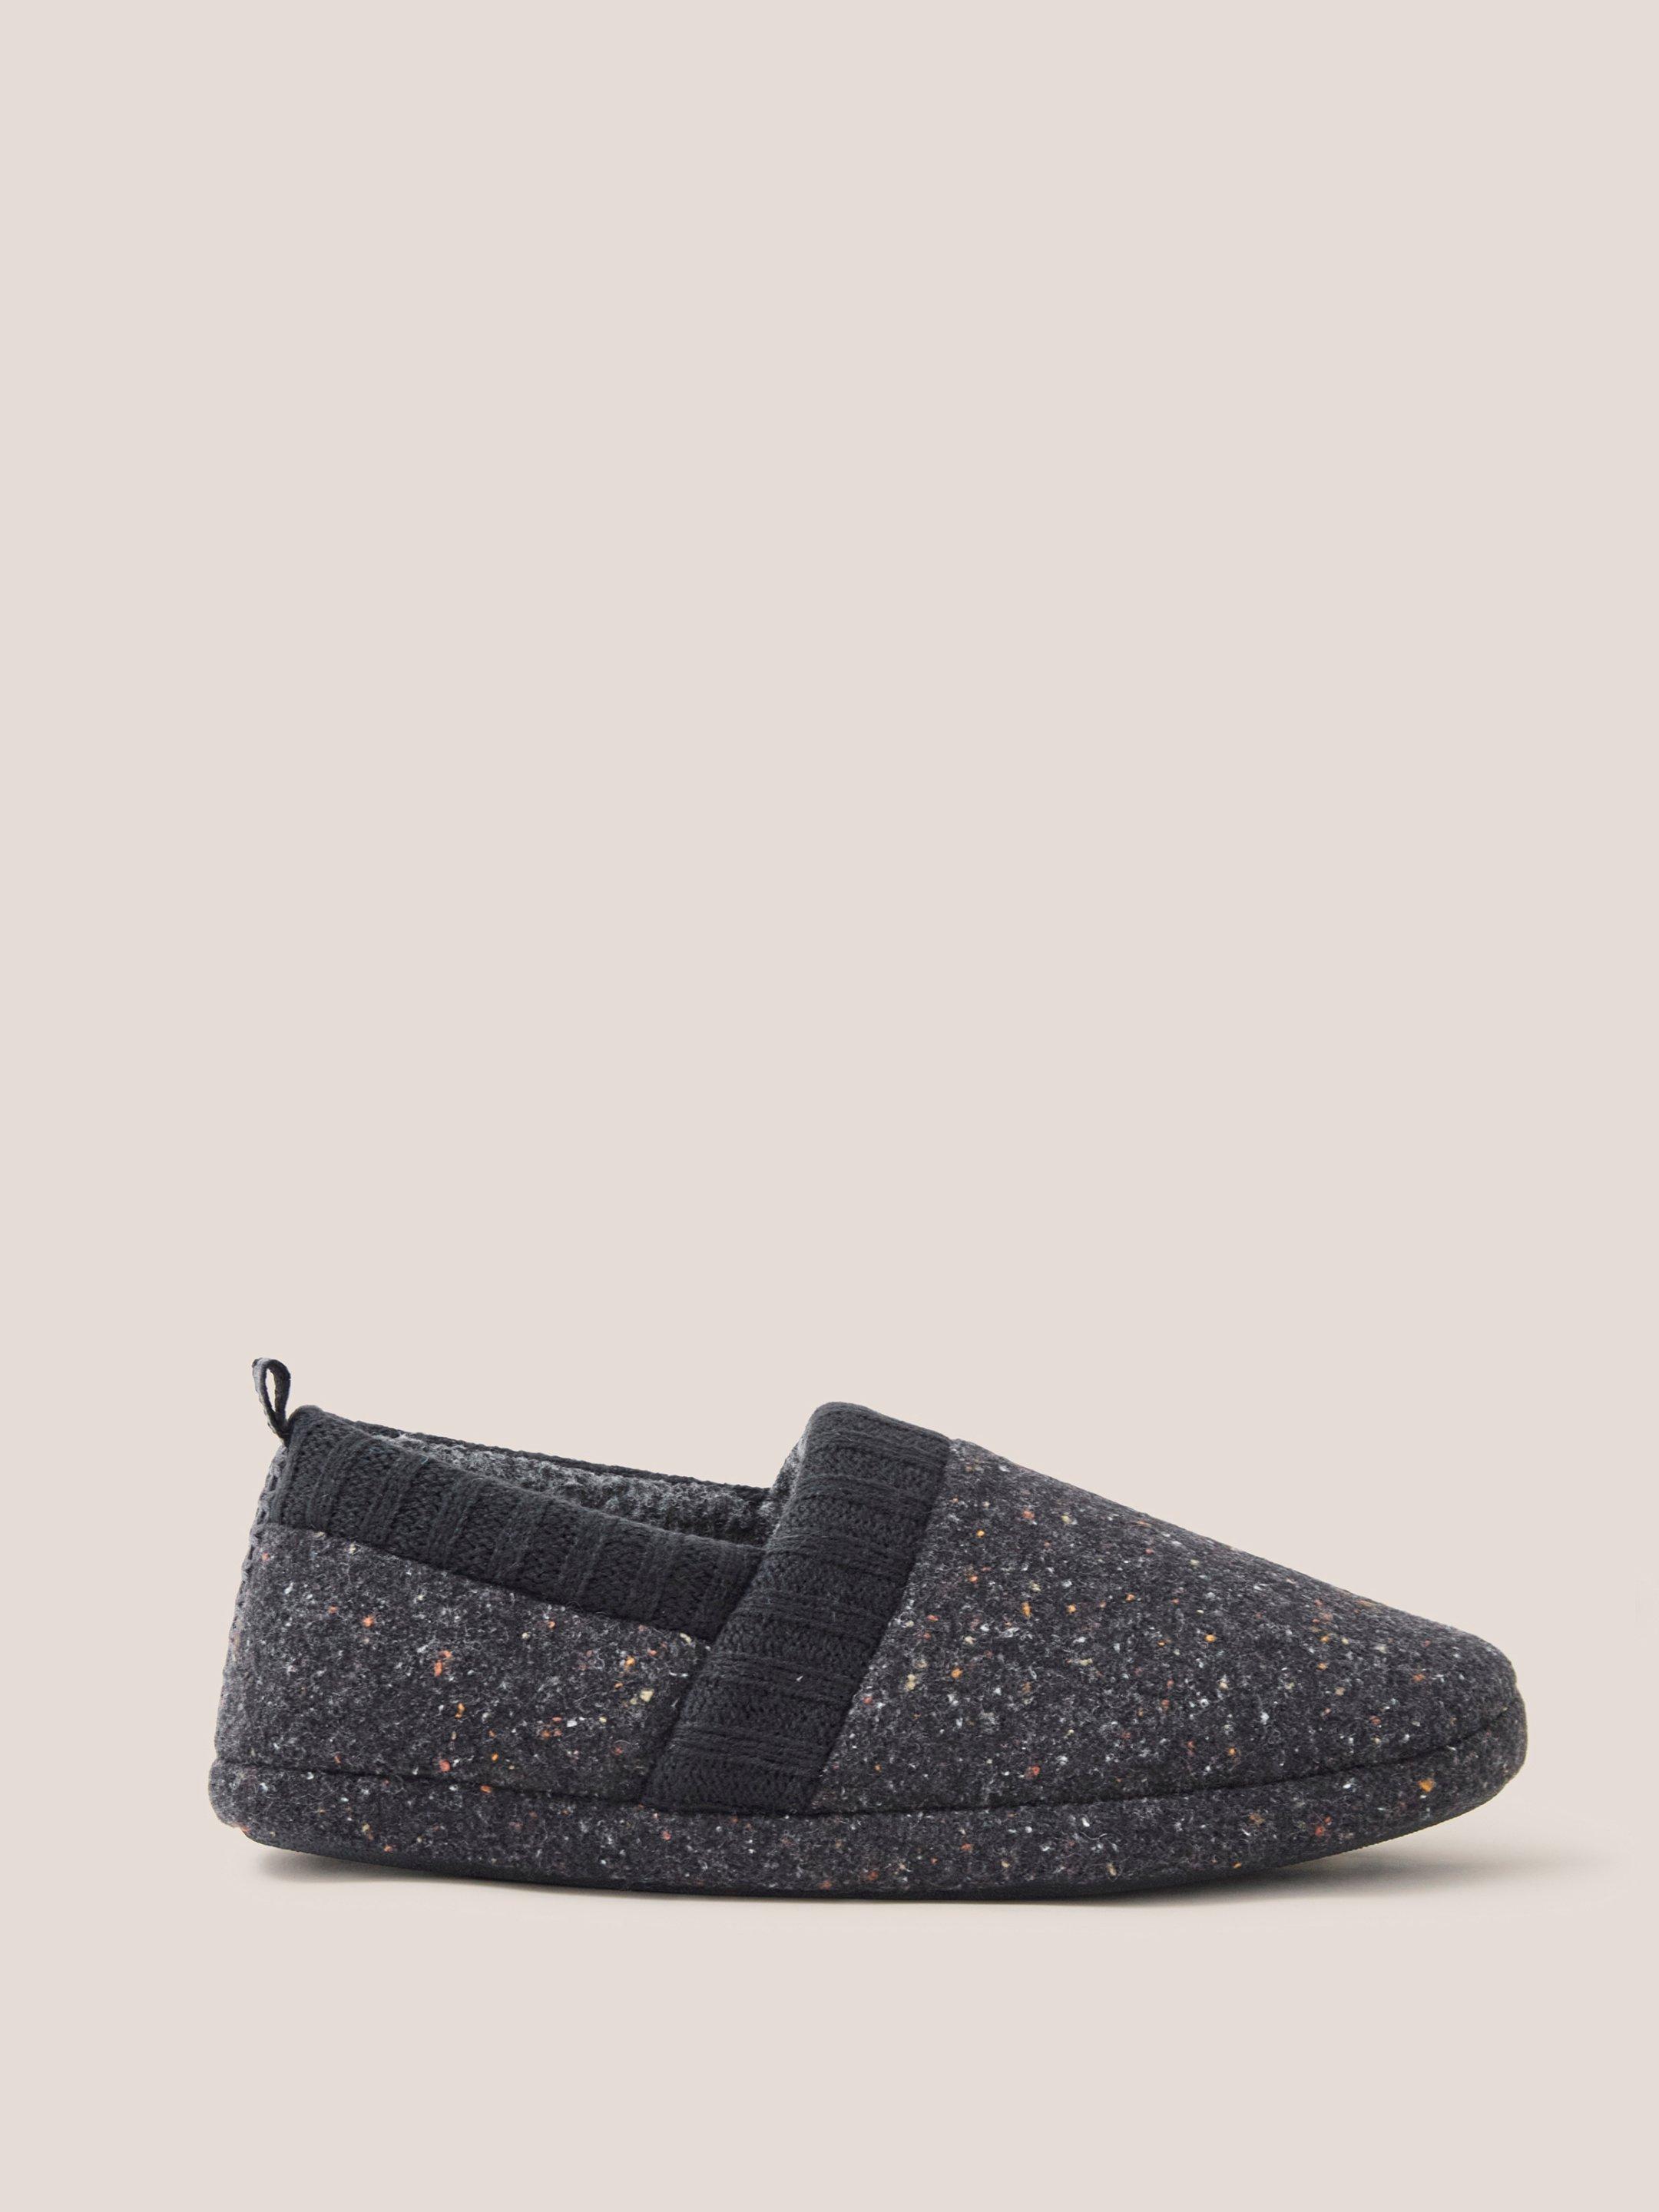 Neppy Closed Back Slipper in CHARC GREY - MODEL FRONT